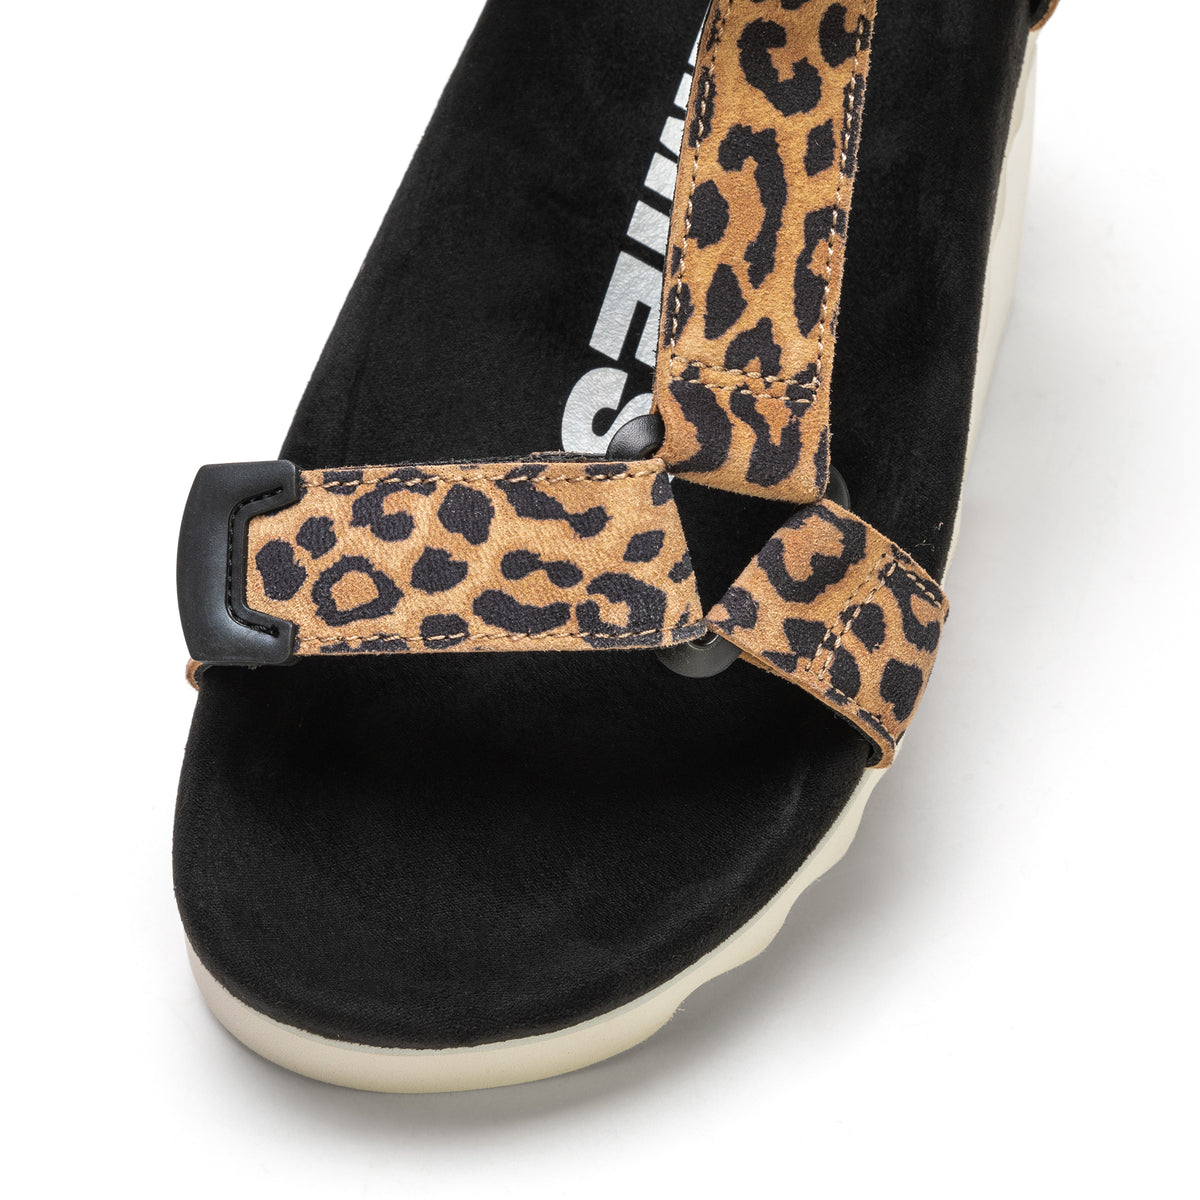 Sandal Tooth Wedge Leopard